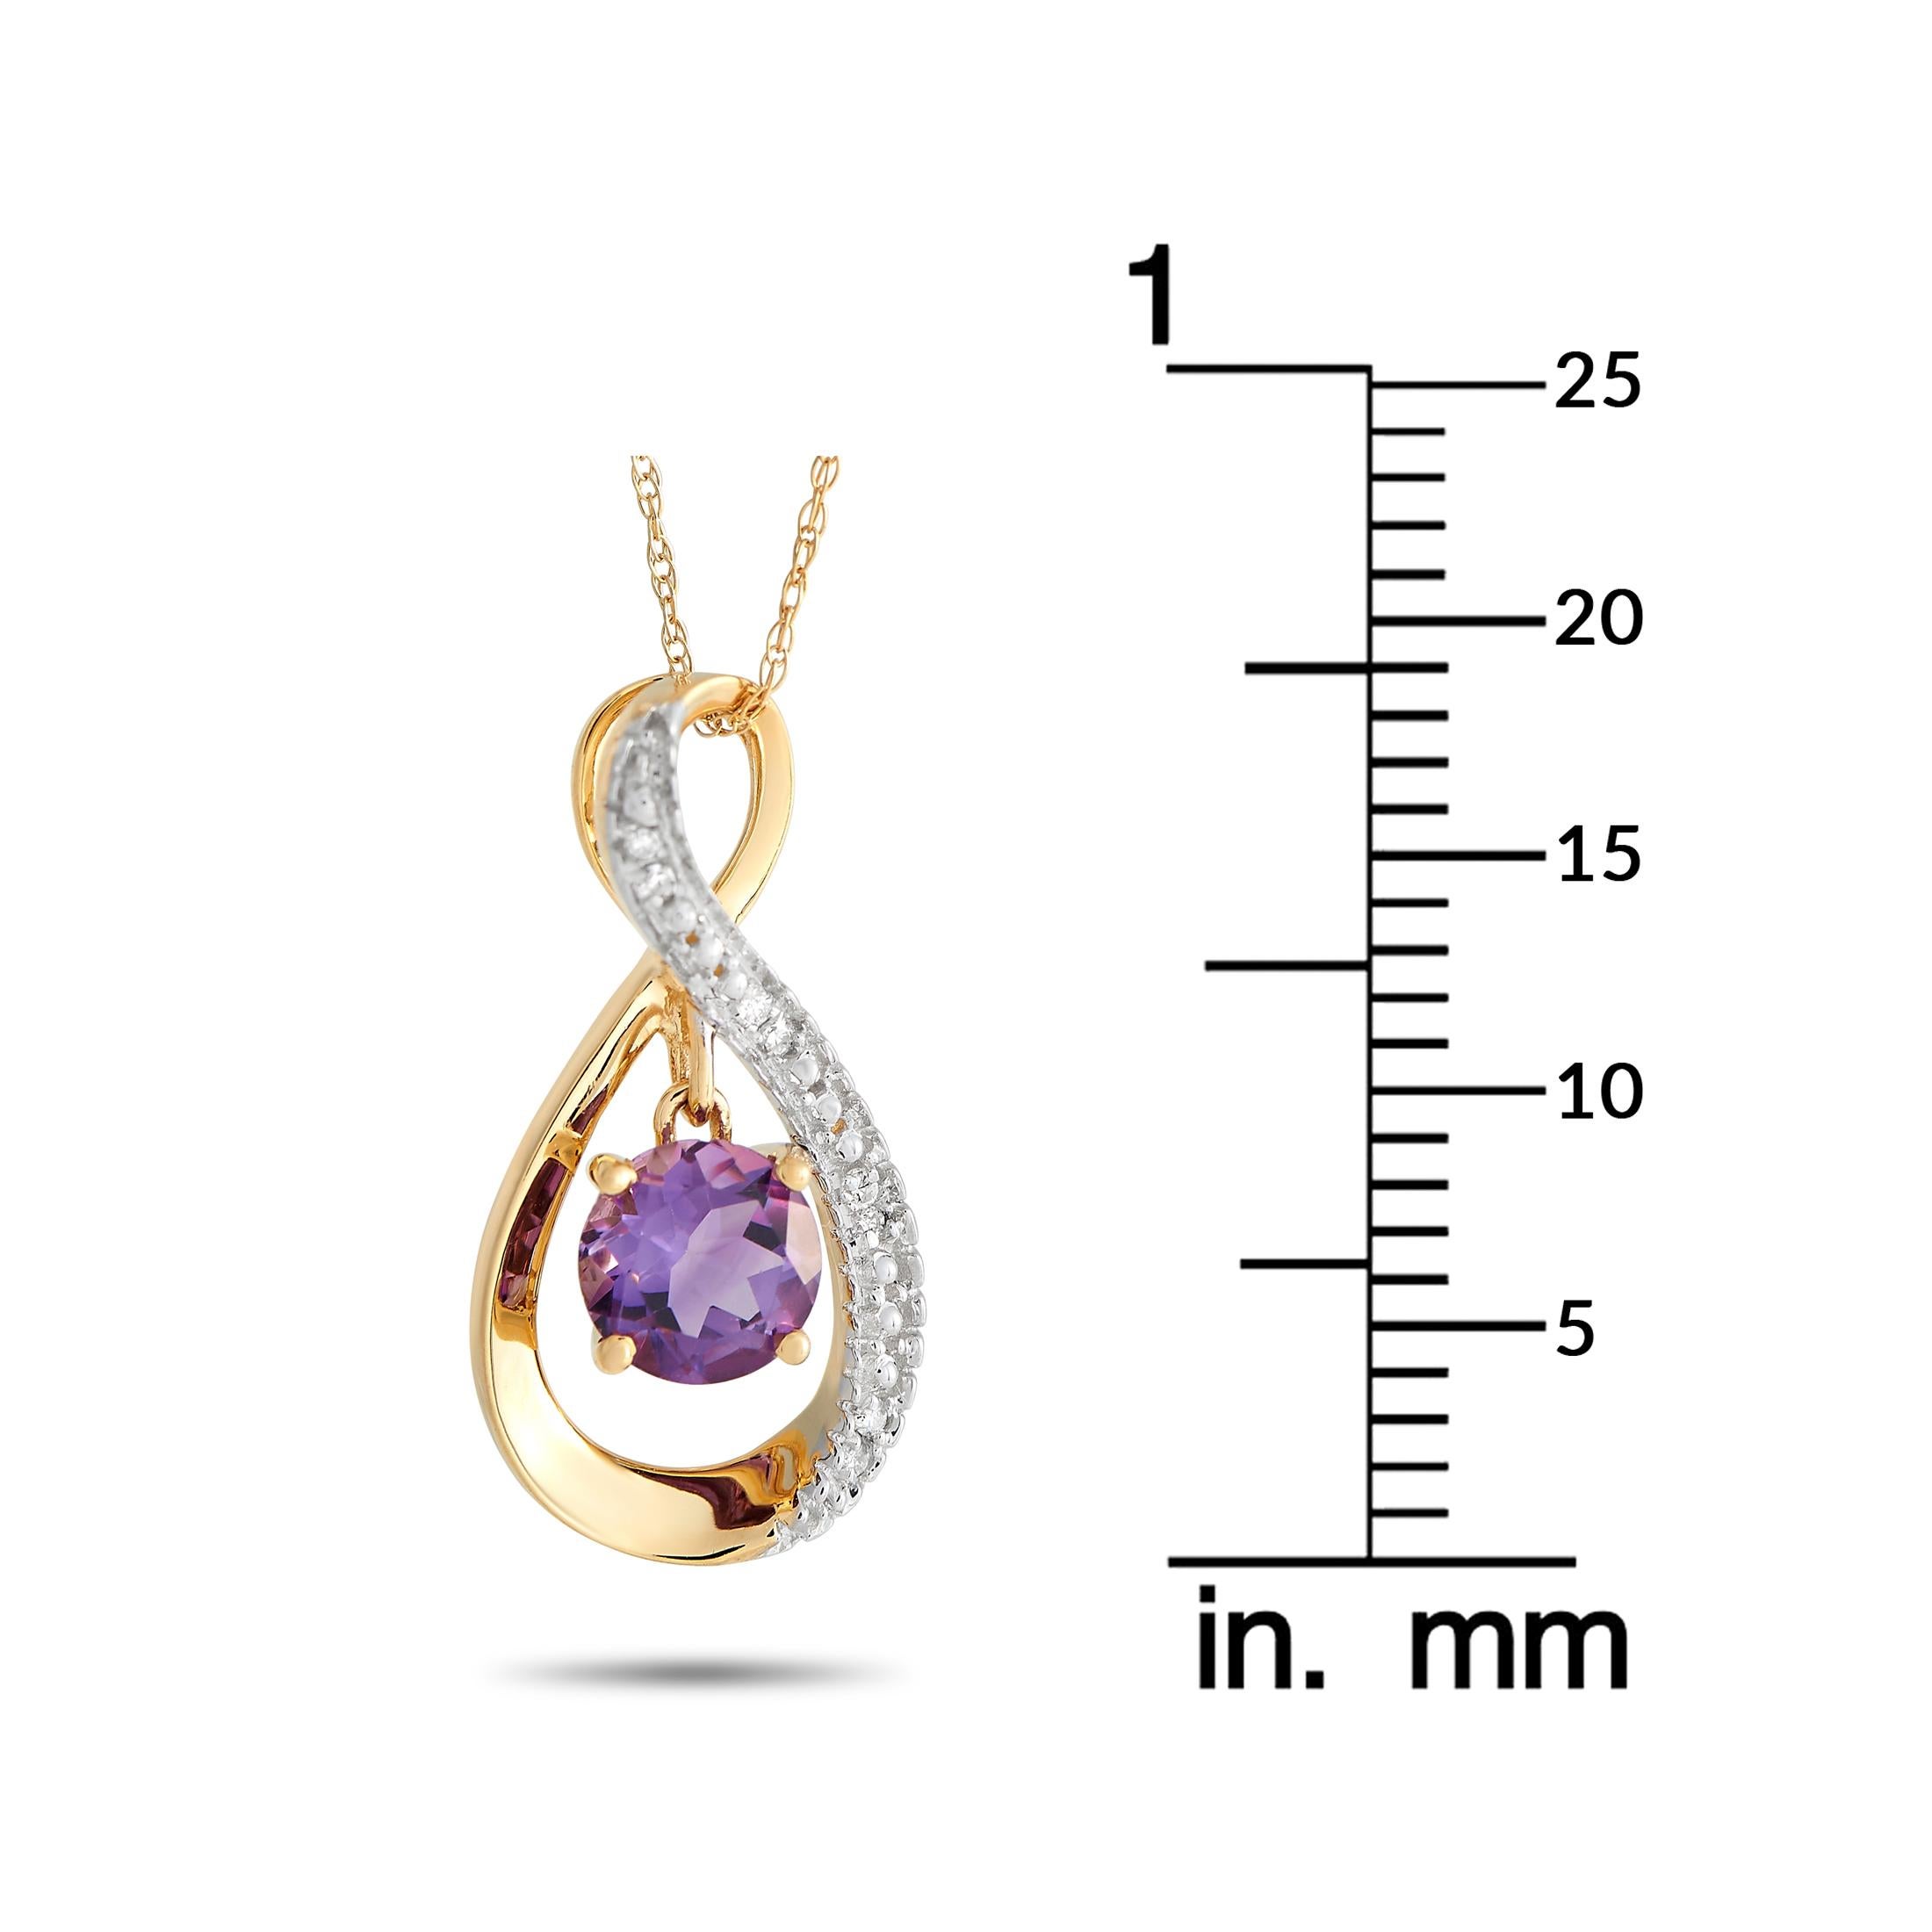 LB Exclusive 14K Yellow Gold 0.03 ct Diamond and Amethyst Pendant Necklace In New Condition For Sale In Southampton, PA